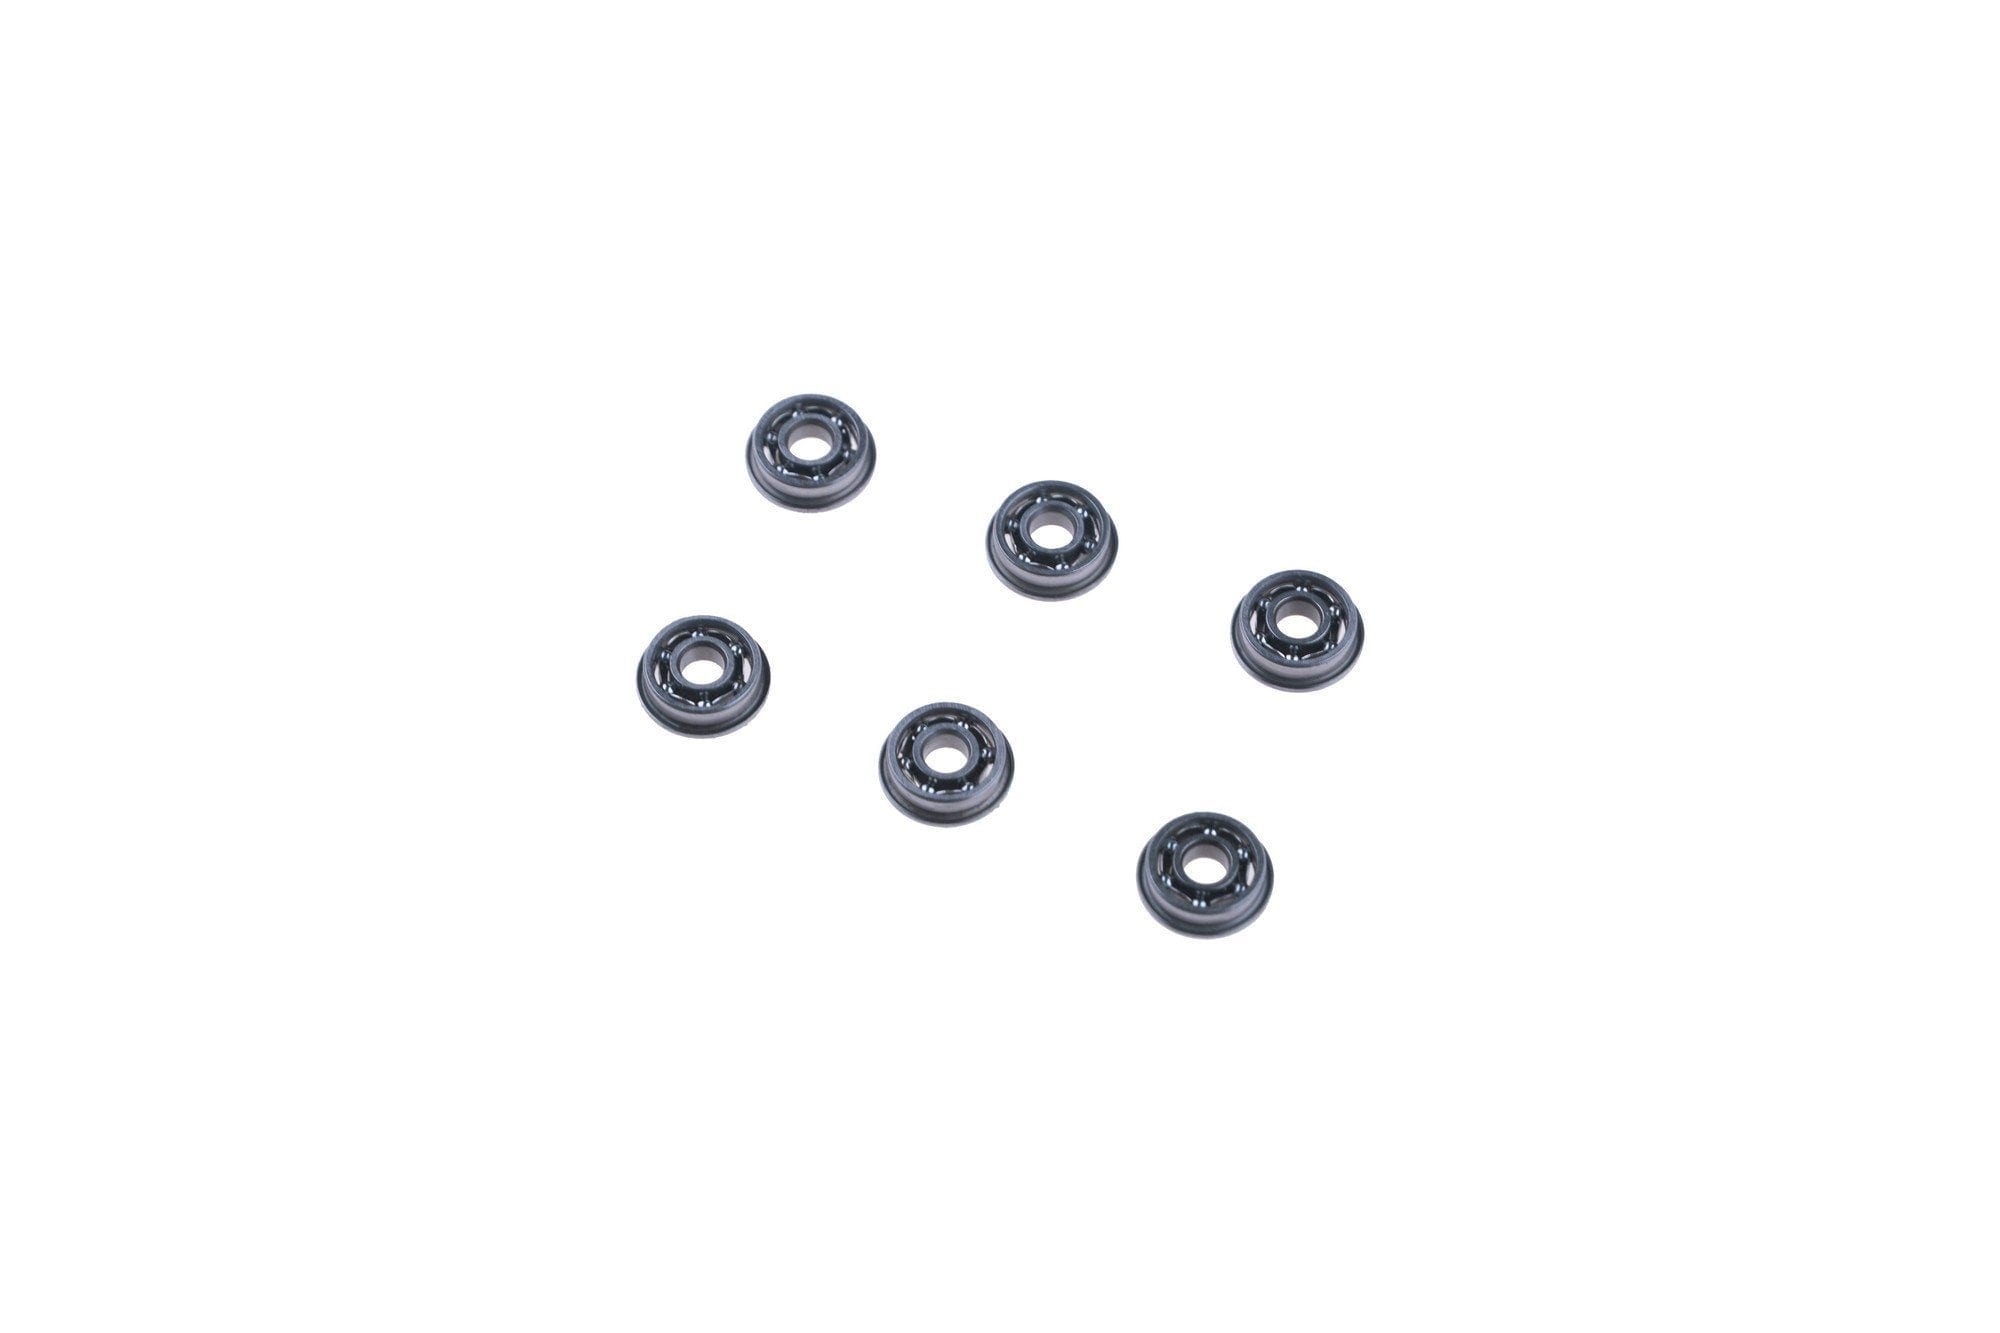 6pcs 8mm ball bearing set by Specna Arms on Airsoft Mania Europe